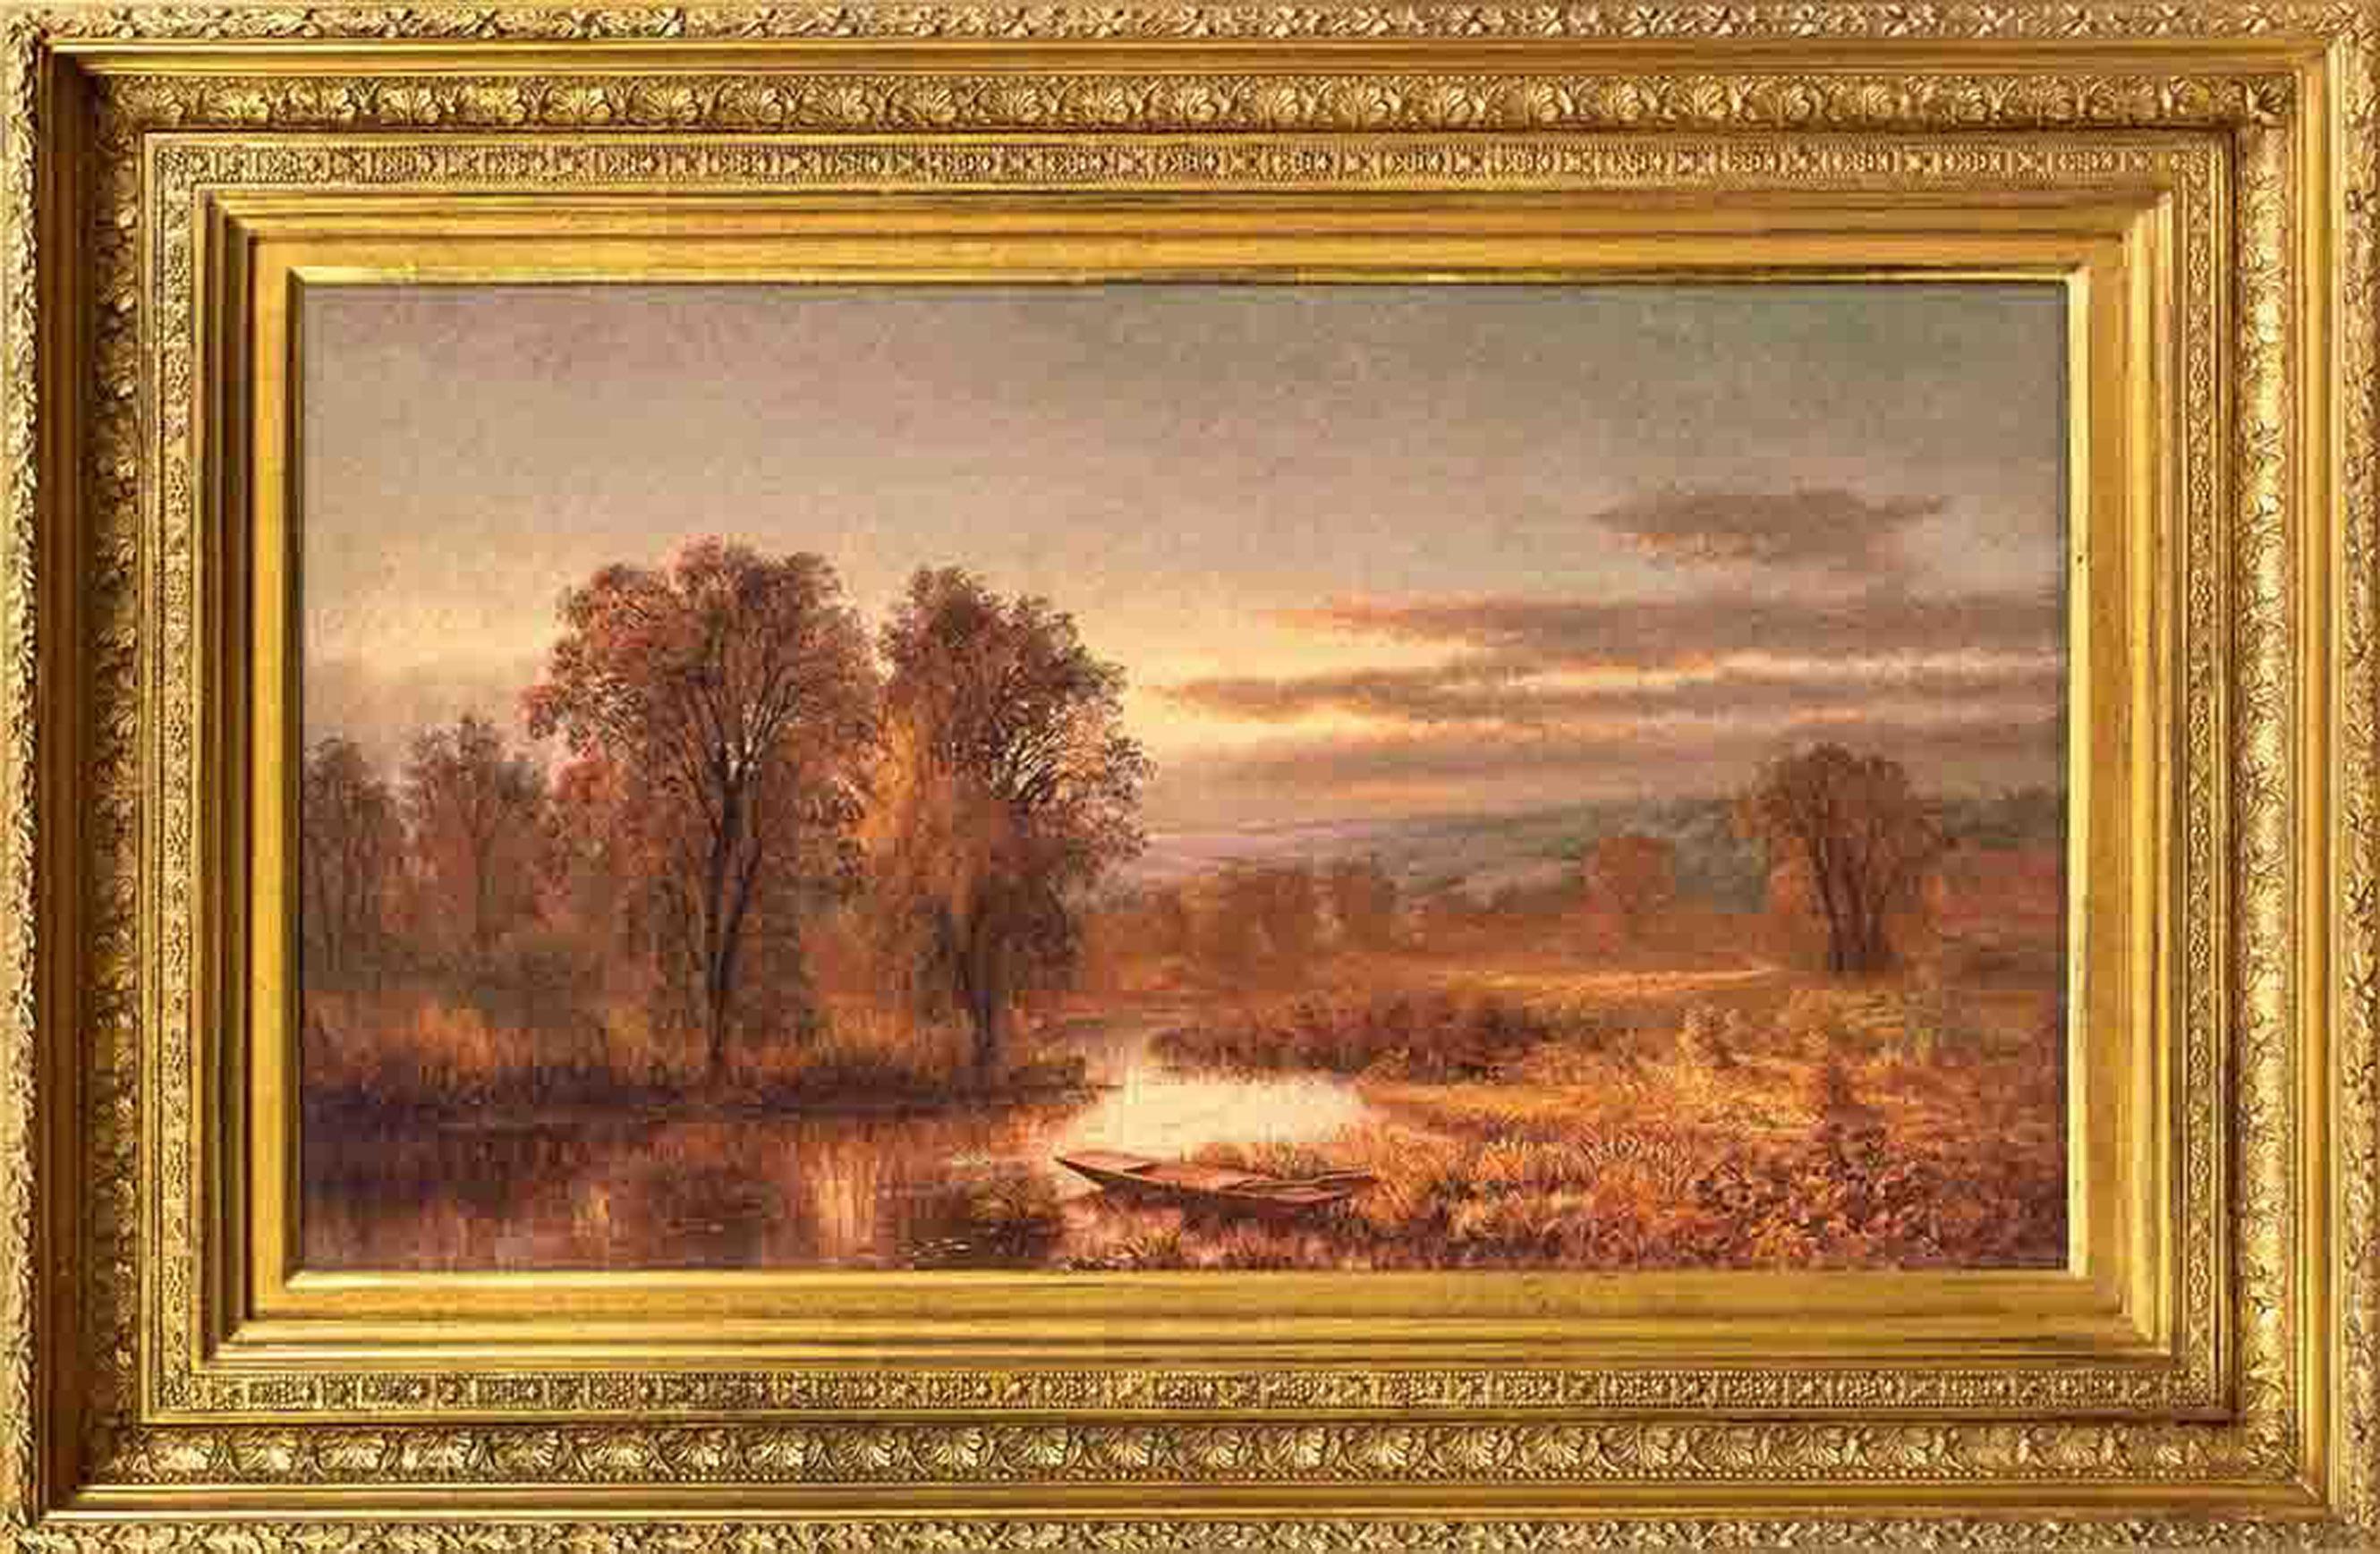 Mary Josephine Walters Landscape Painting - Autumn River with Punt in the Reeds by M.J. Walters (American, 1837-1883)